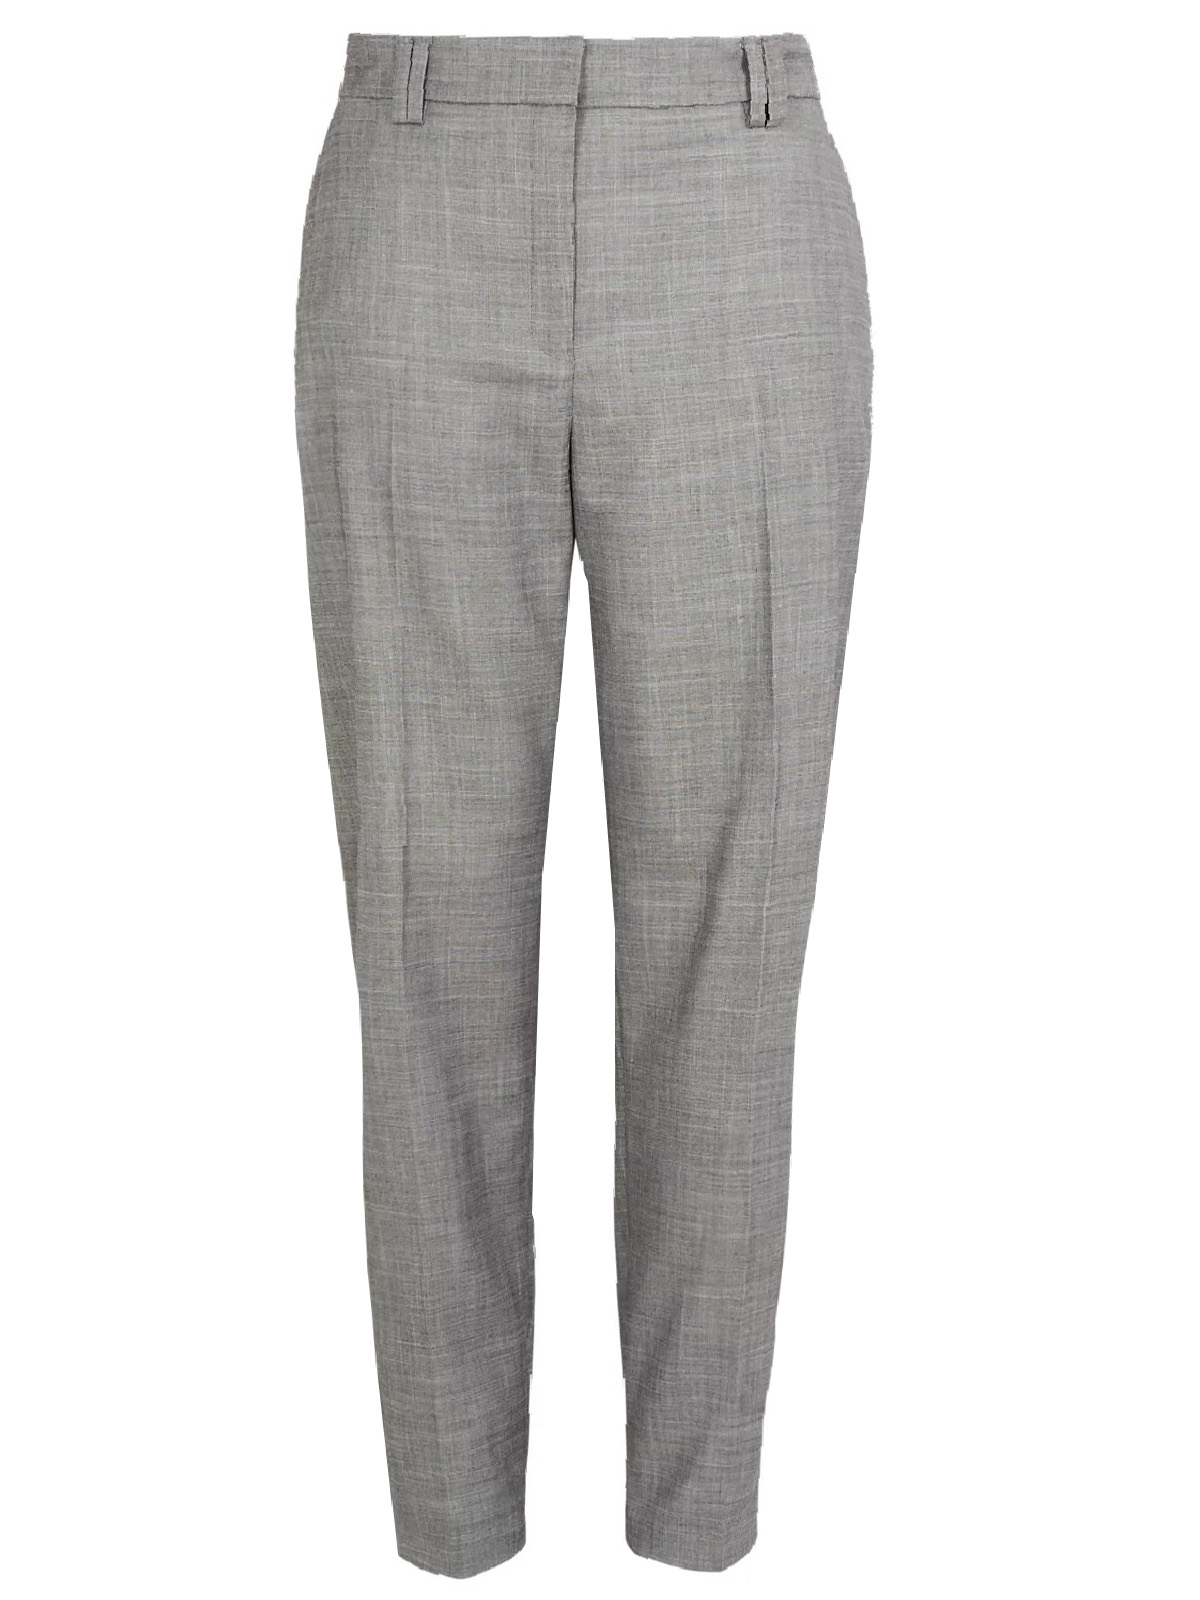 Marks and Spencer - - M&5 GREY Freya Straight Leg Trousers - Plus Size ...